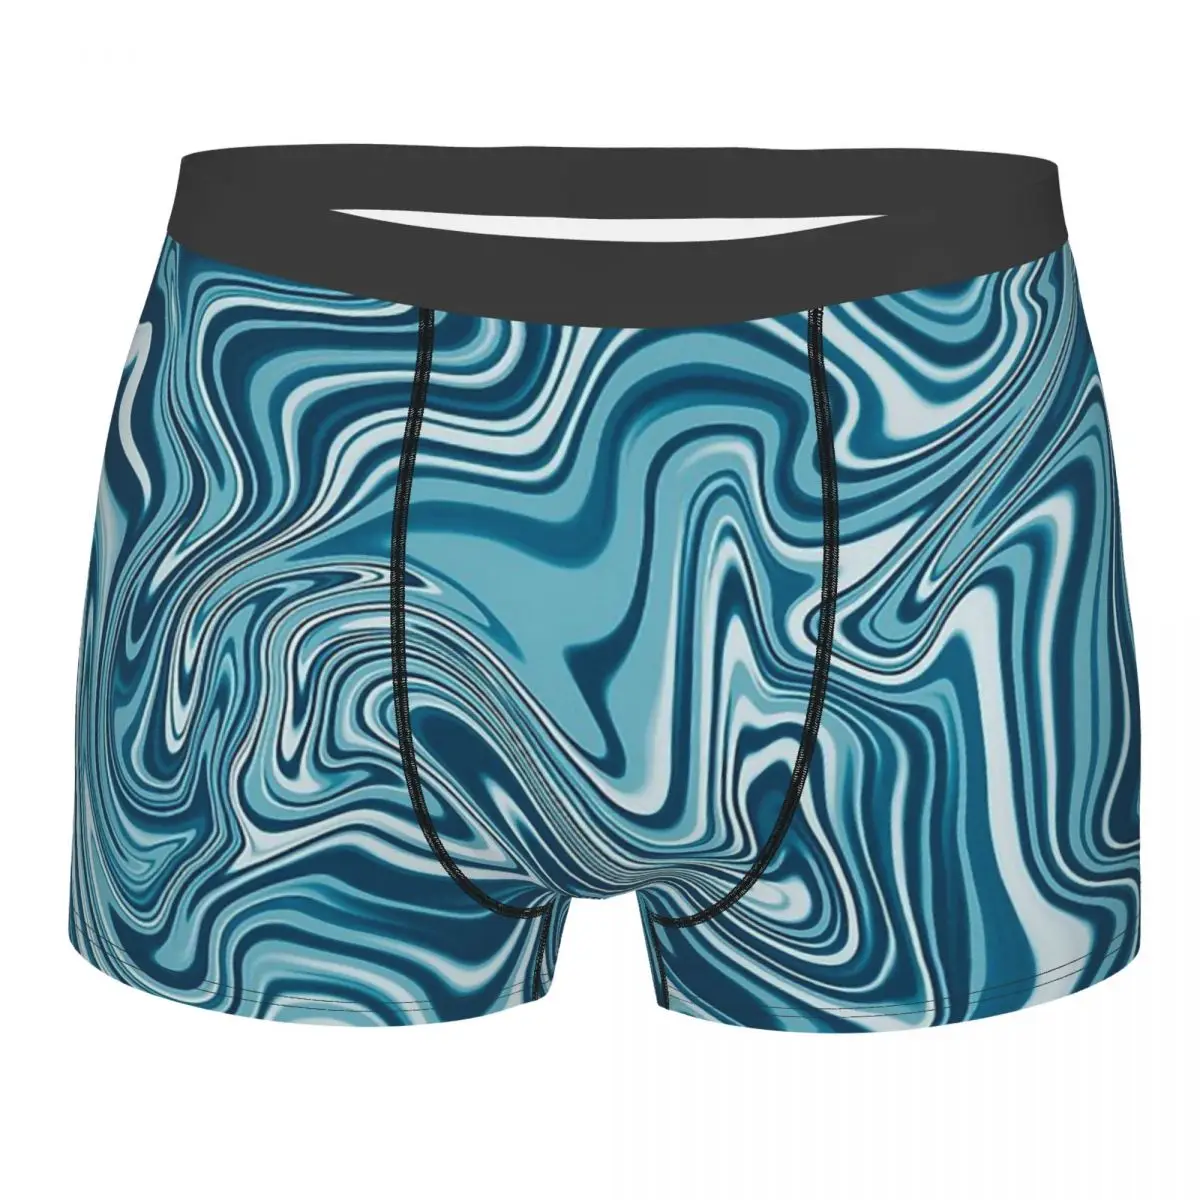 

Stunning Pale Turquoise Abstract Swirl Marbling Marbled Marble Pattern Underpants Panties Man Underwear Shorts Boxer Briefs